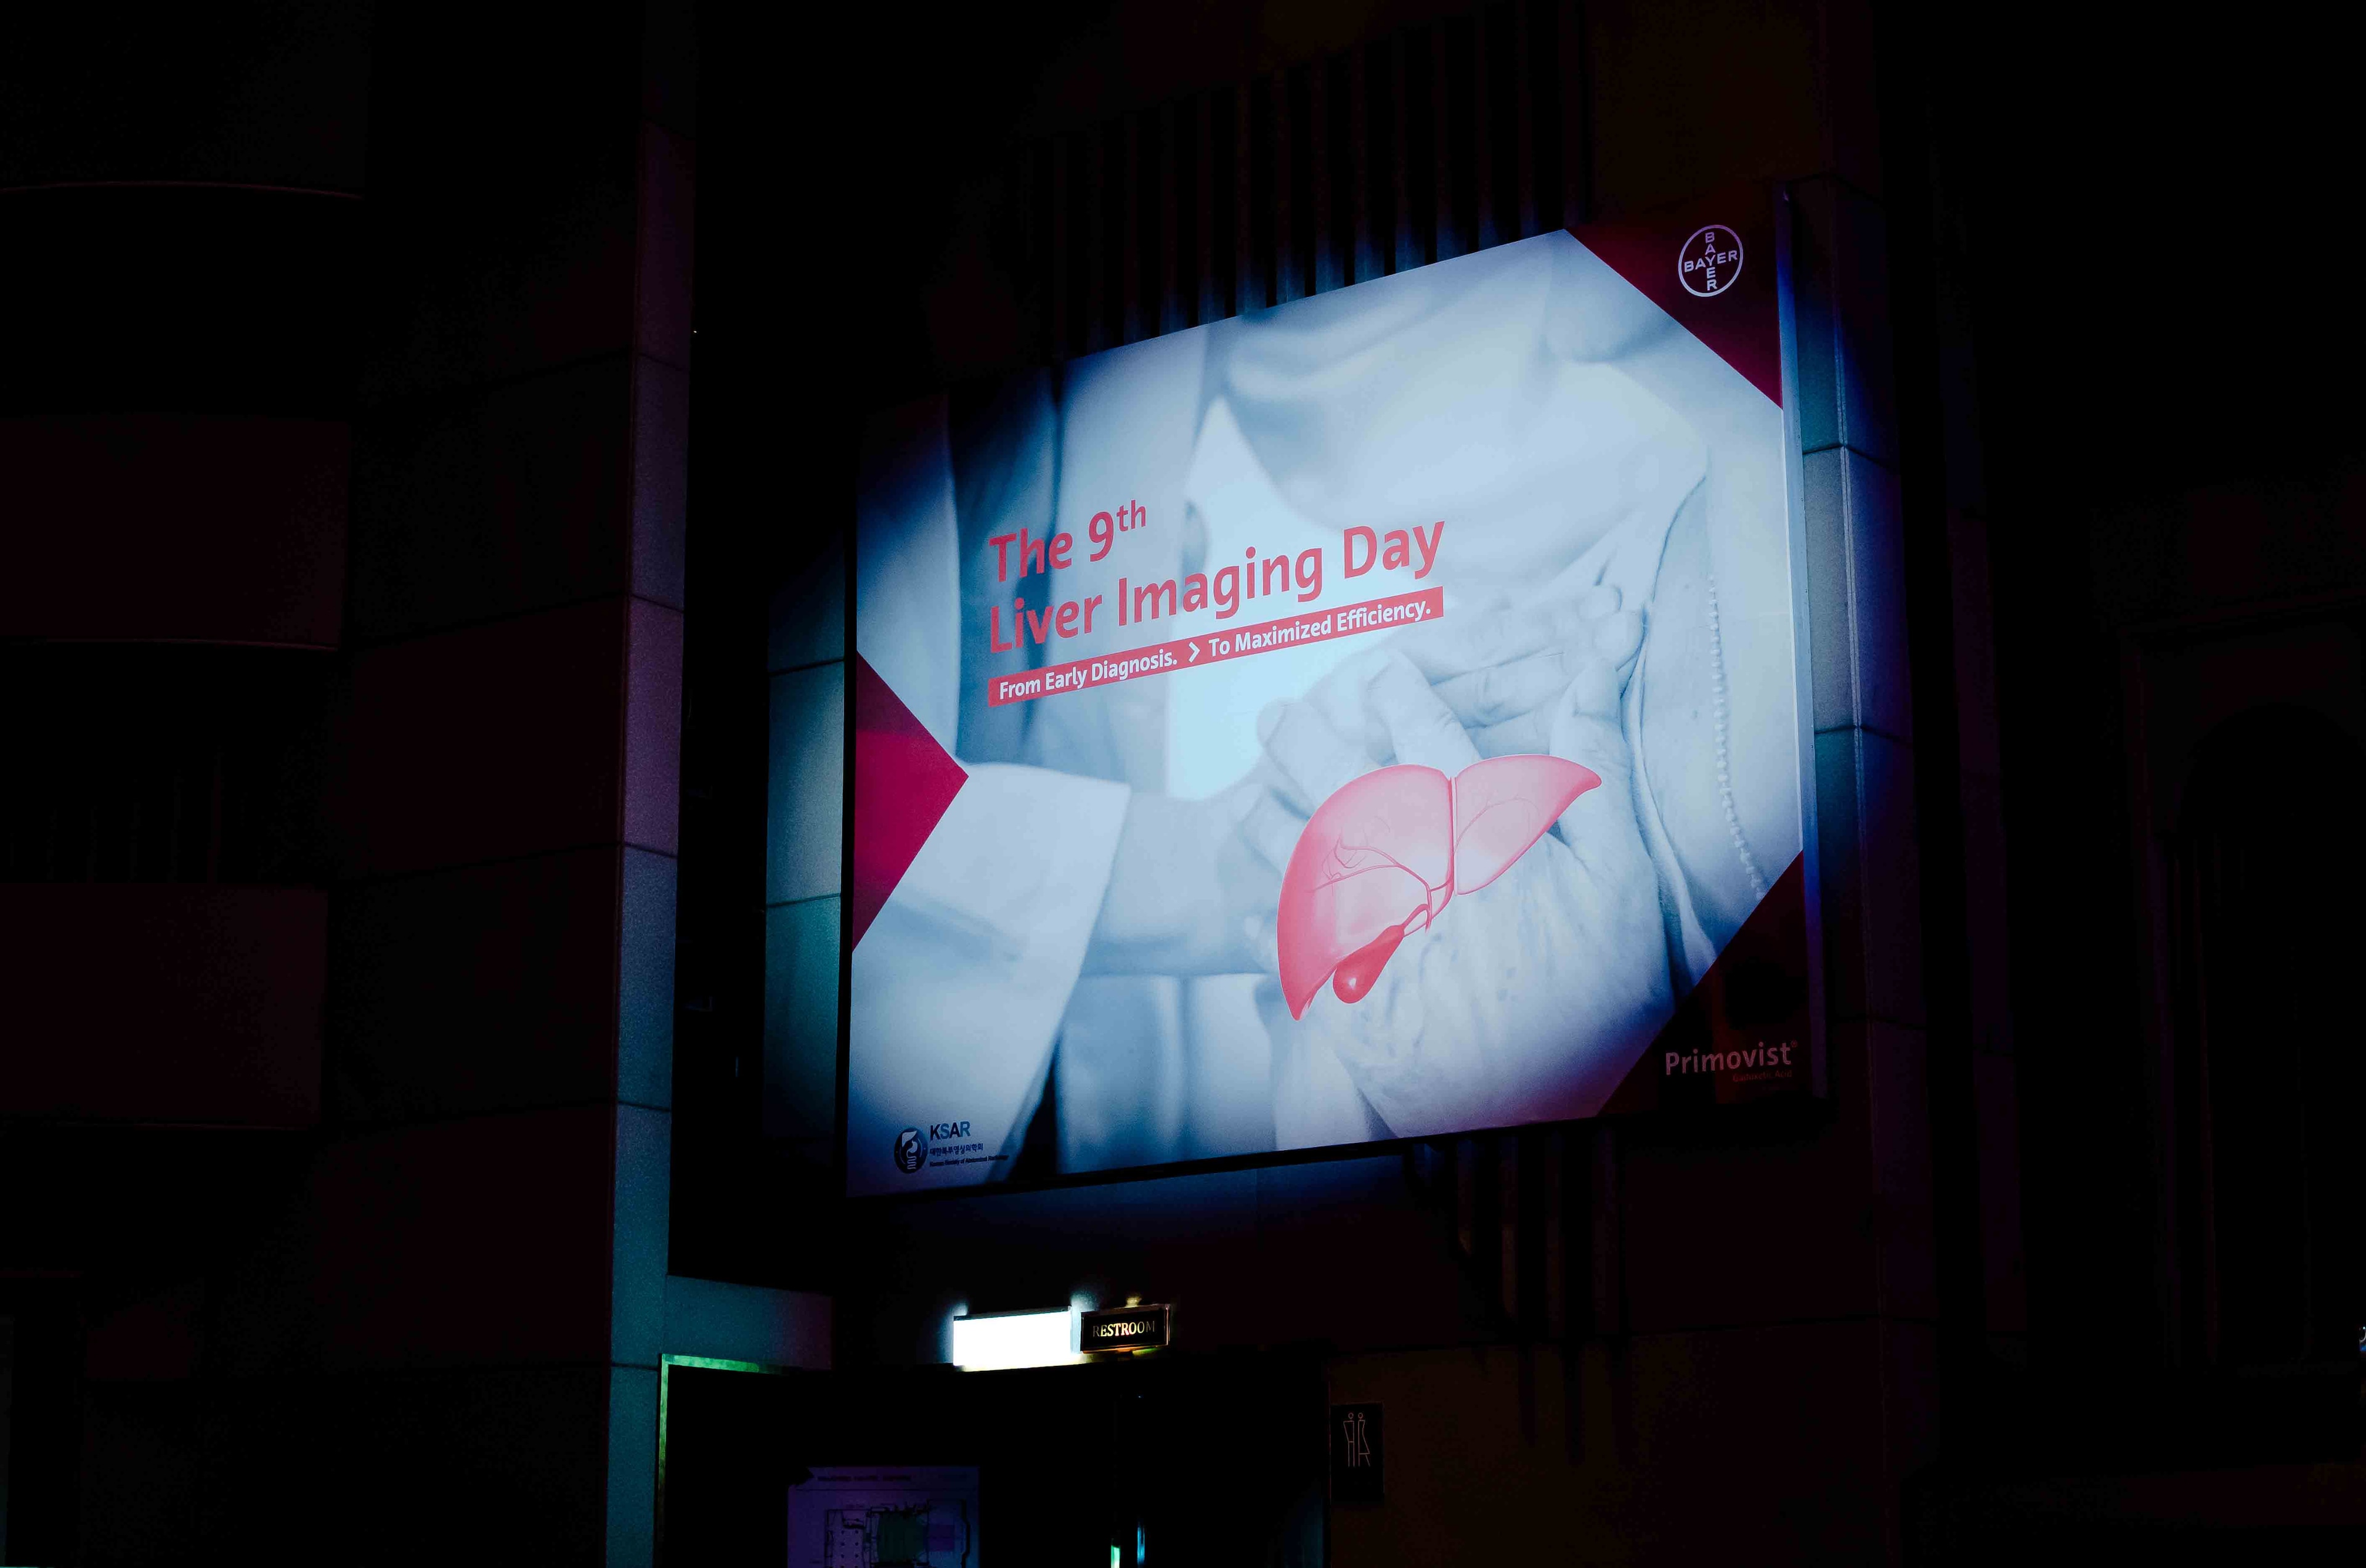 Liver imaging day 2019 preview image